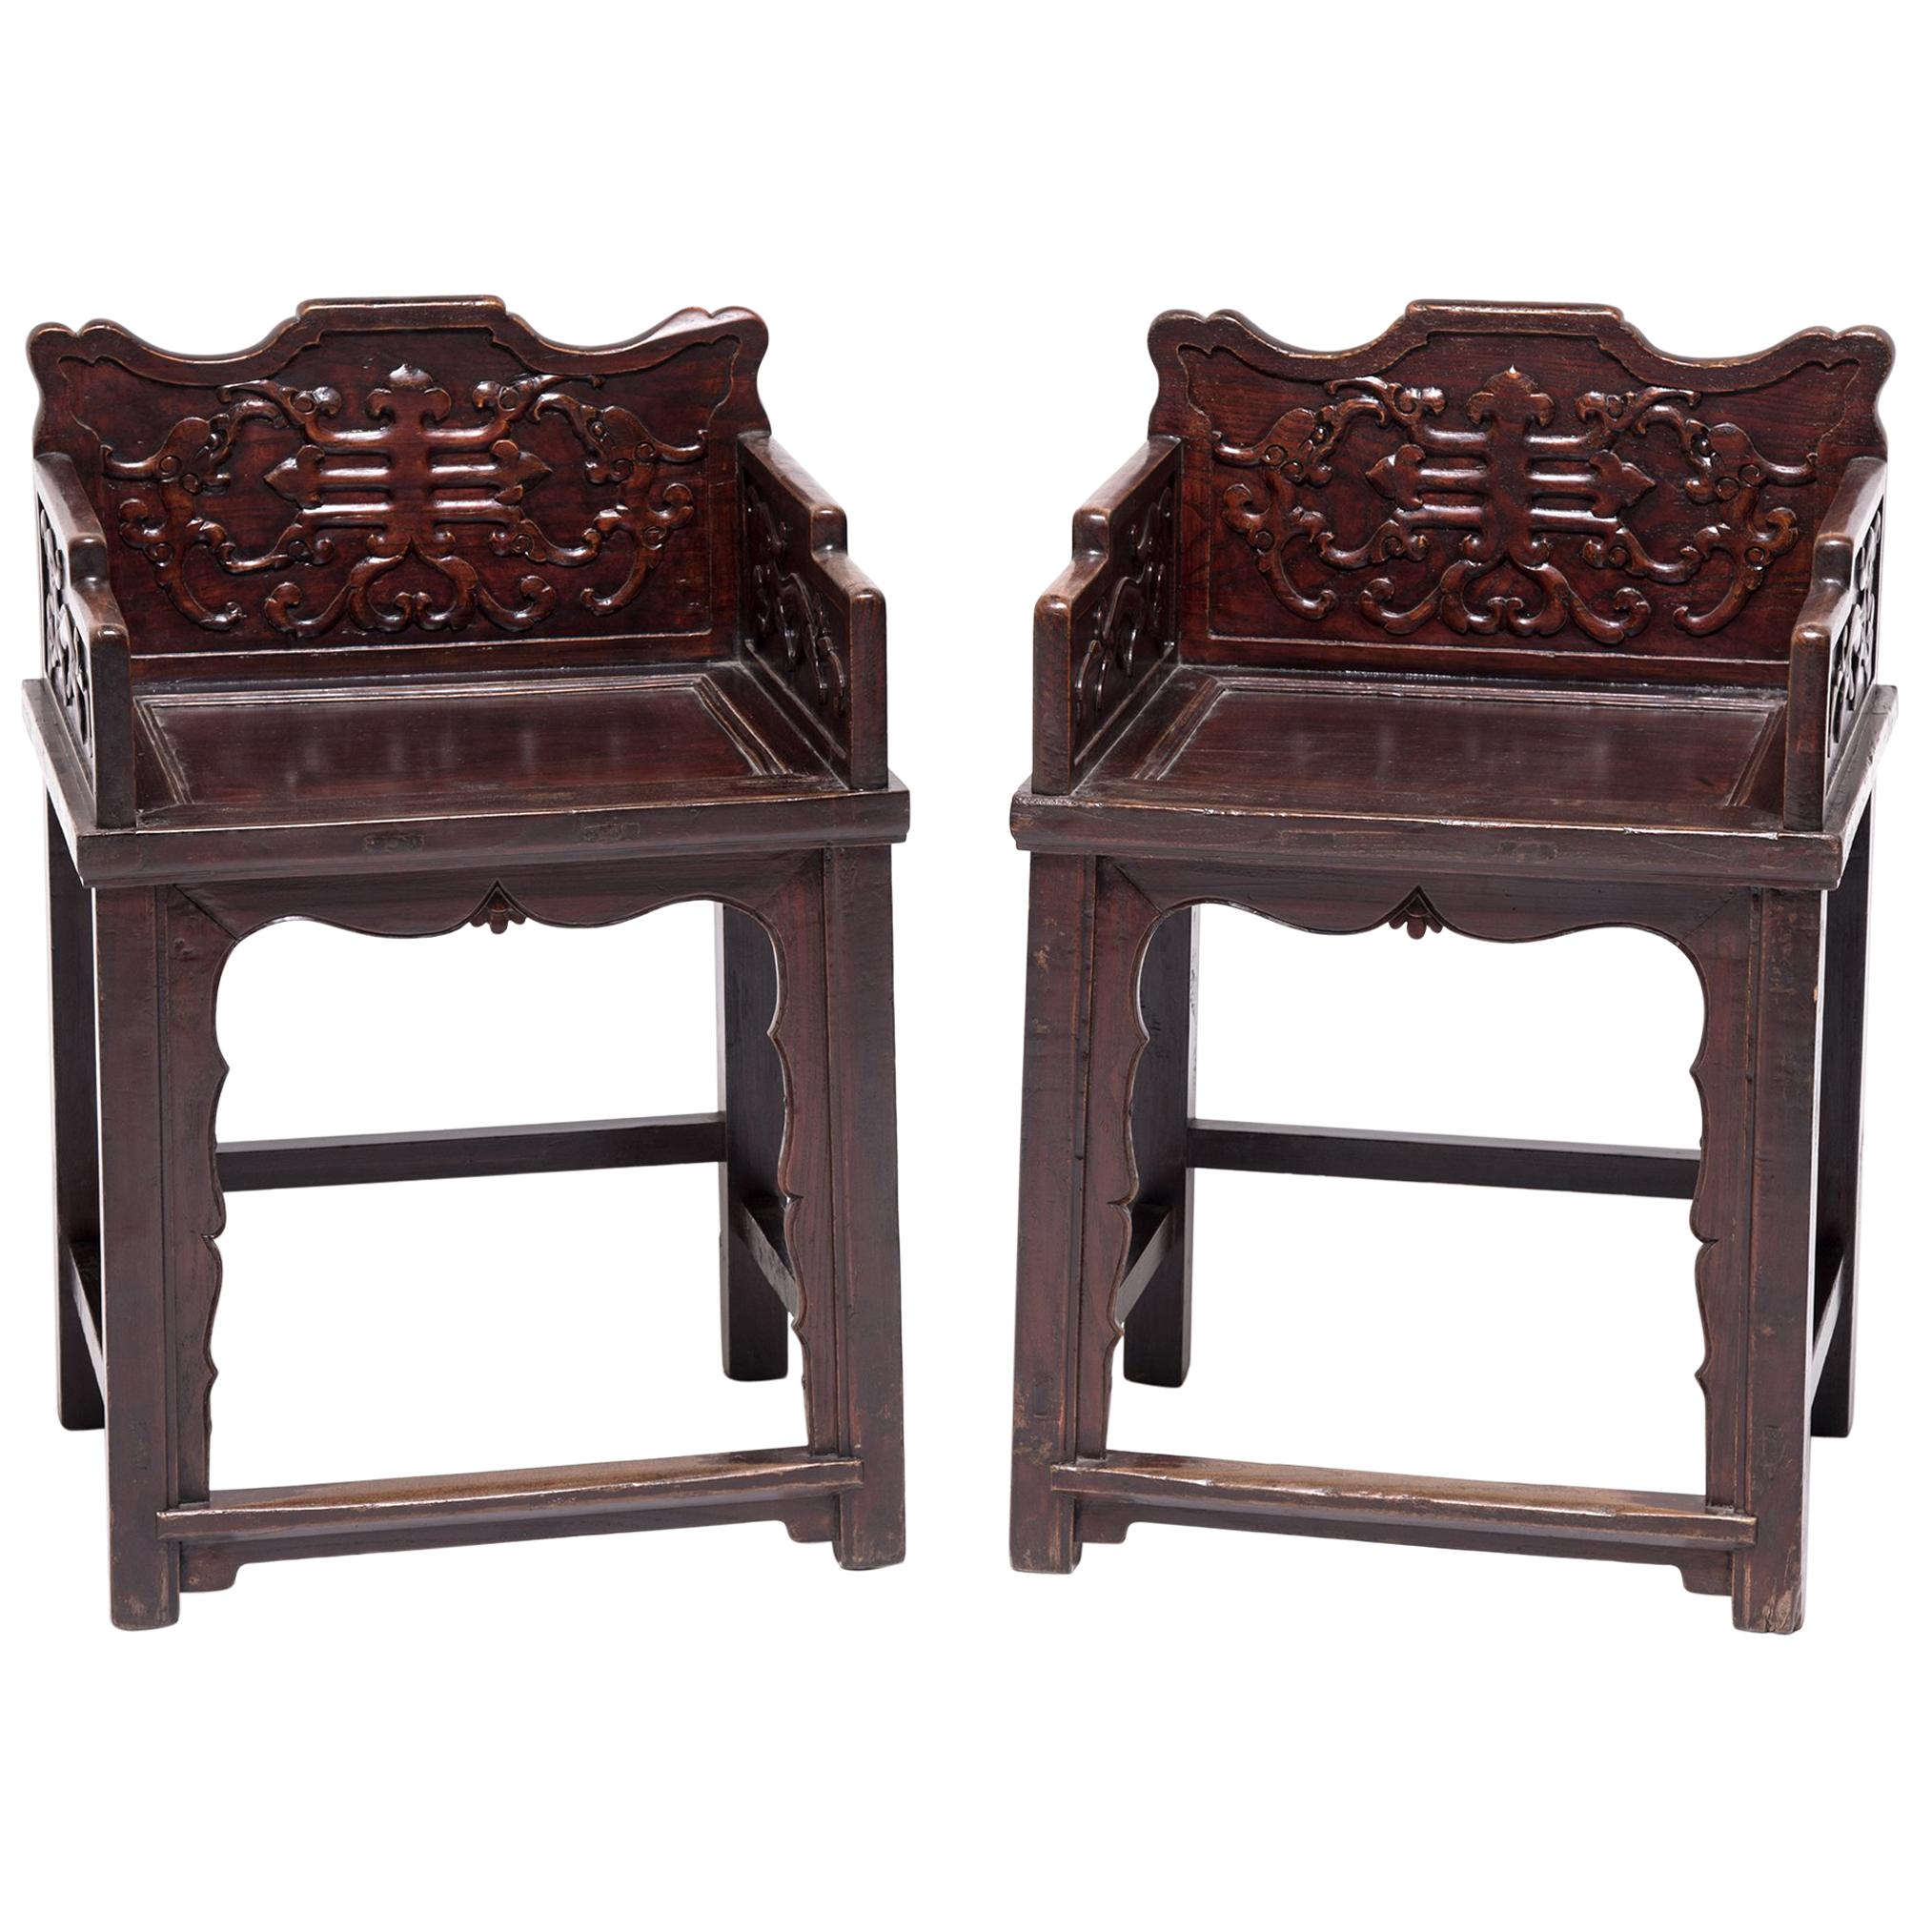 Pair of 19th Century Chinese Low Back Chairs